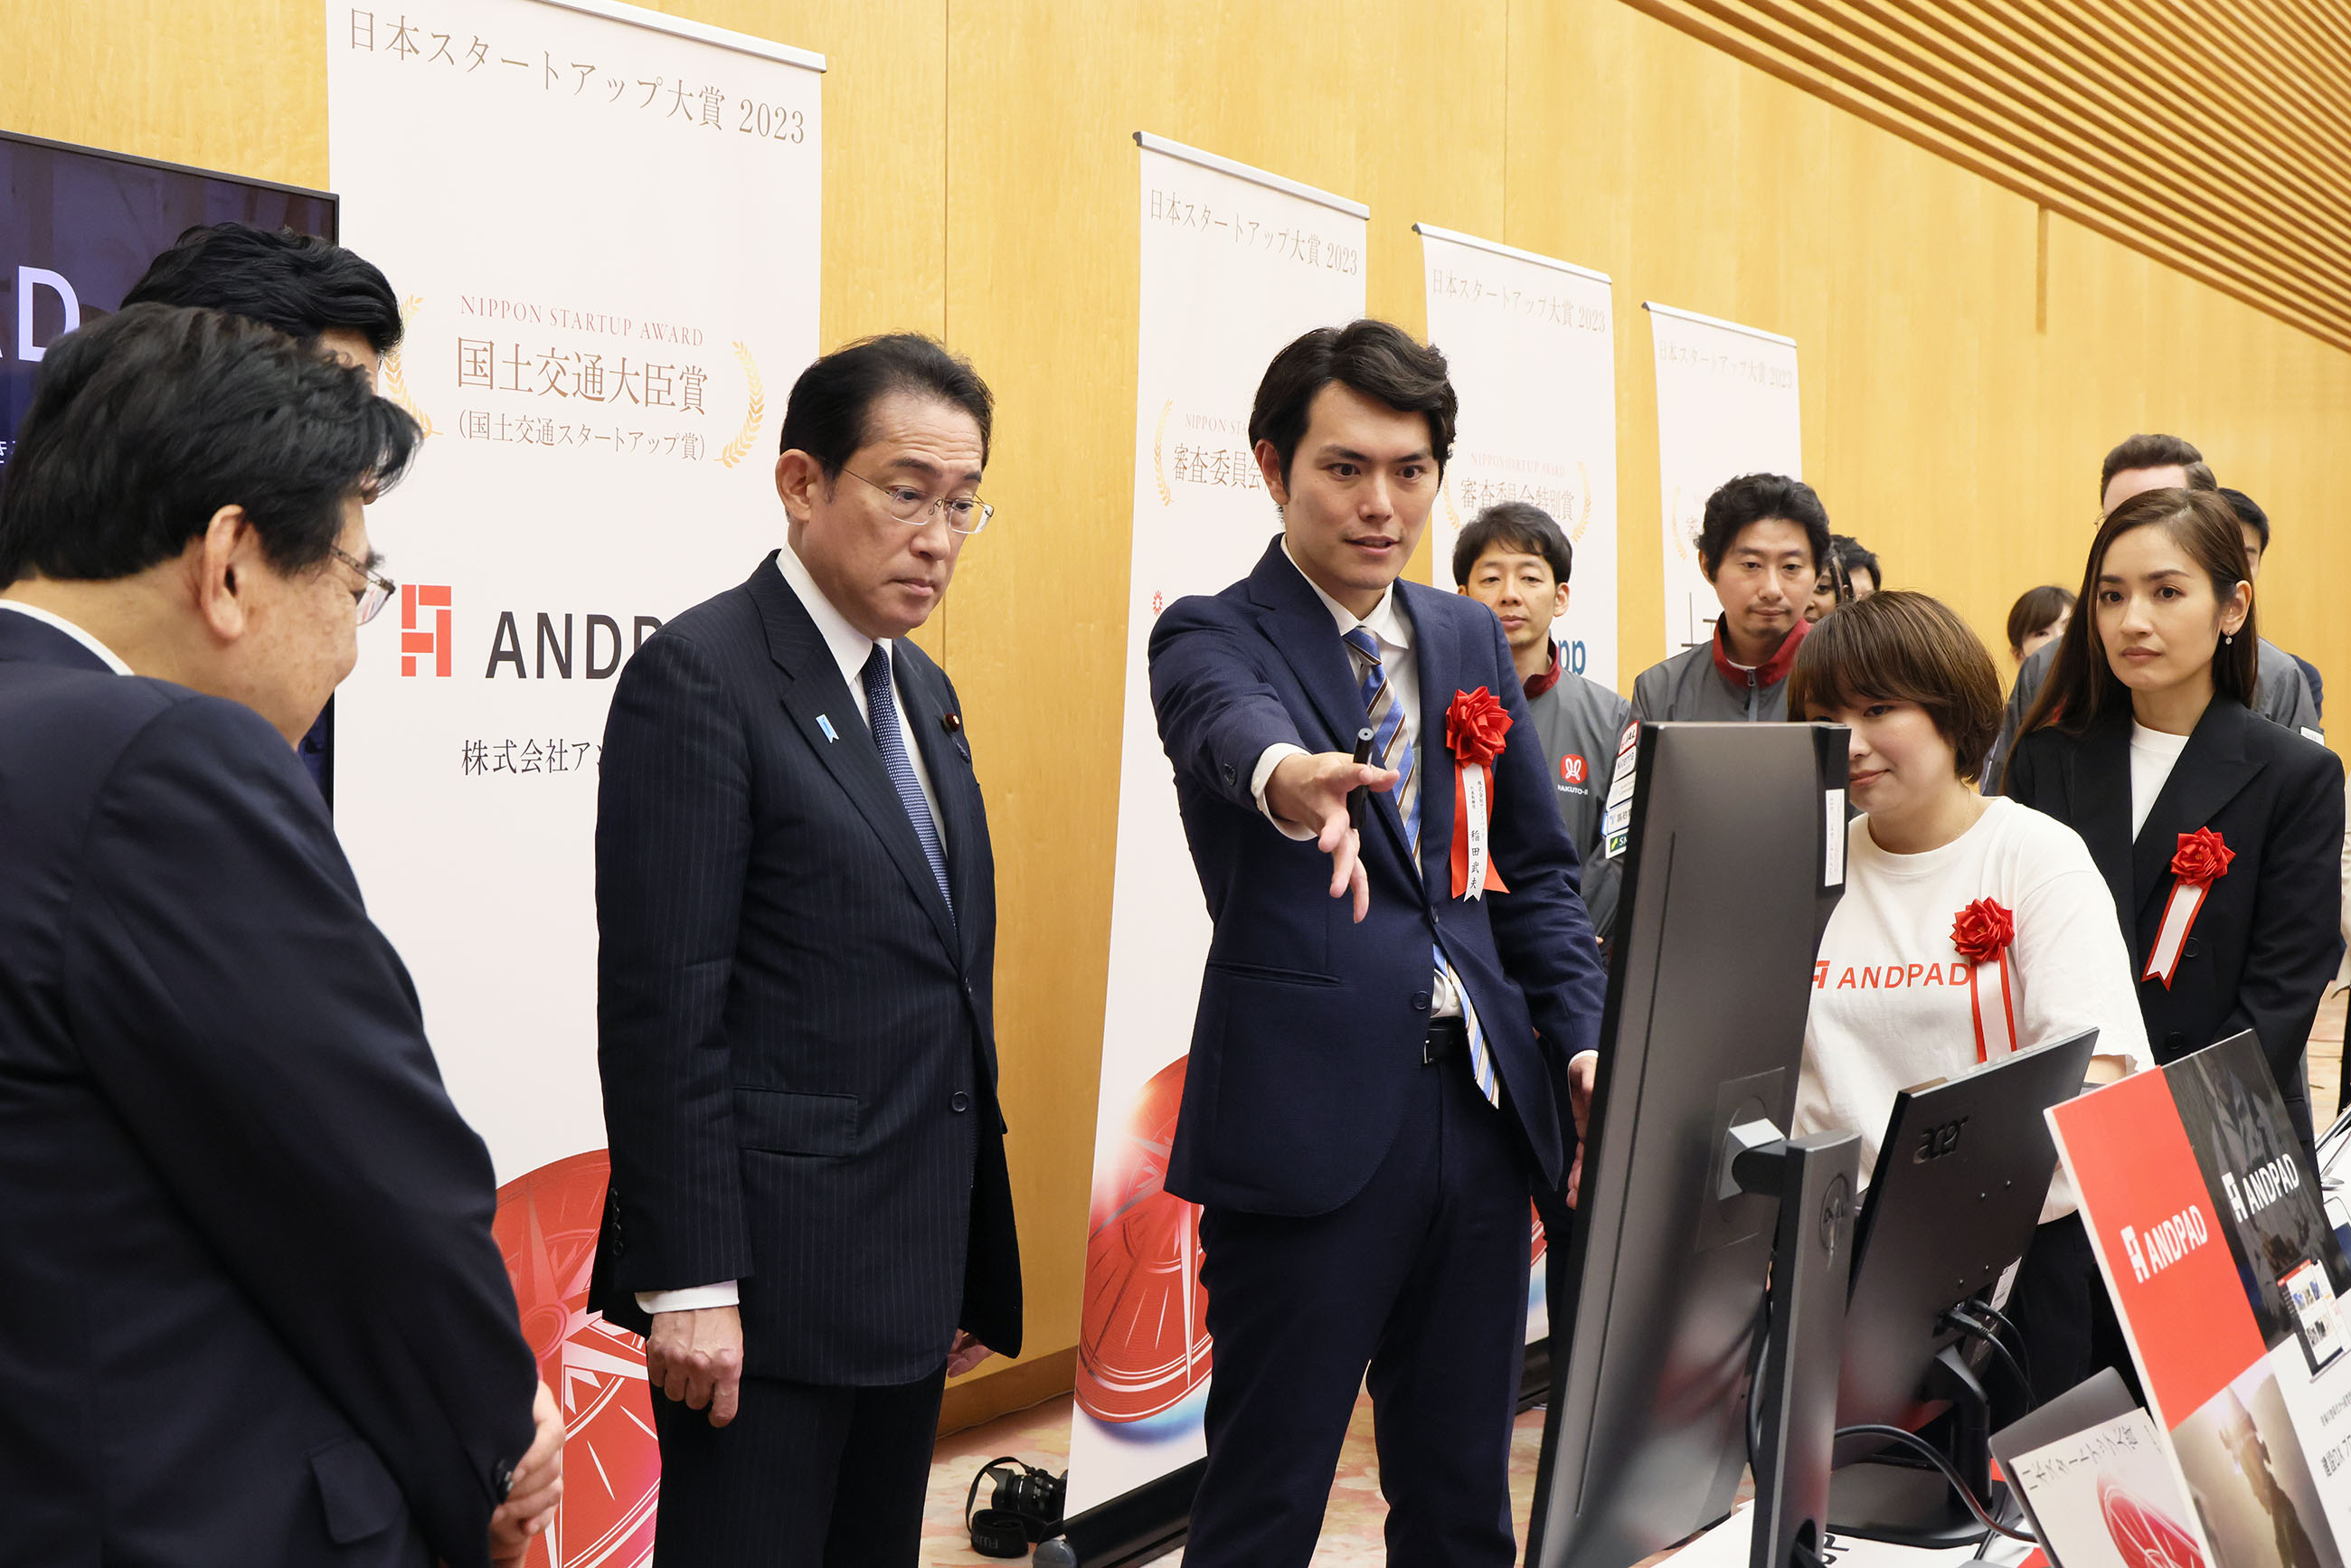 Prime Minister Kishida viewing the exhibition booth of award winners (7)